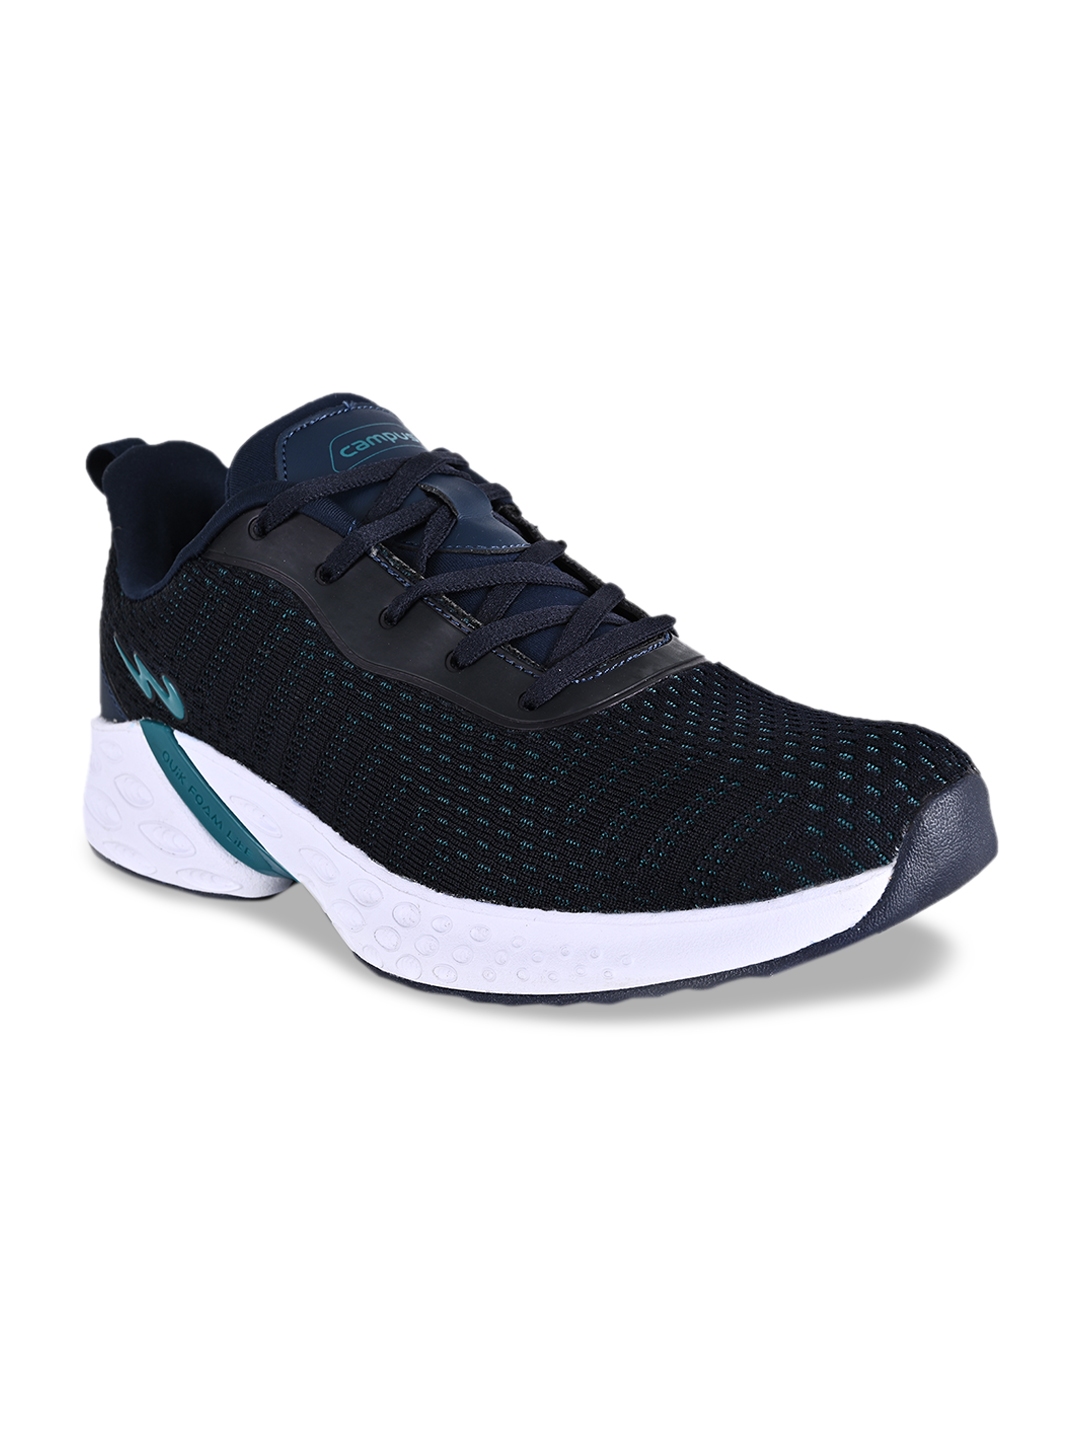 Buy Campus Men Navy Blue Running Shoes - Sports Shoes for Men 11960808 ...